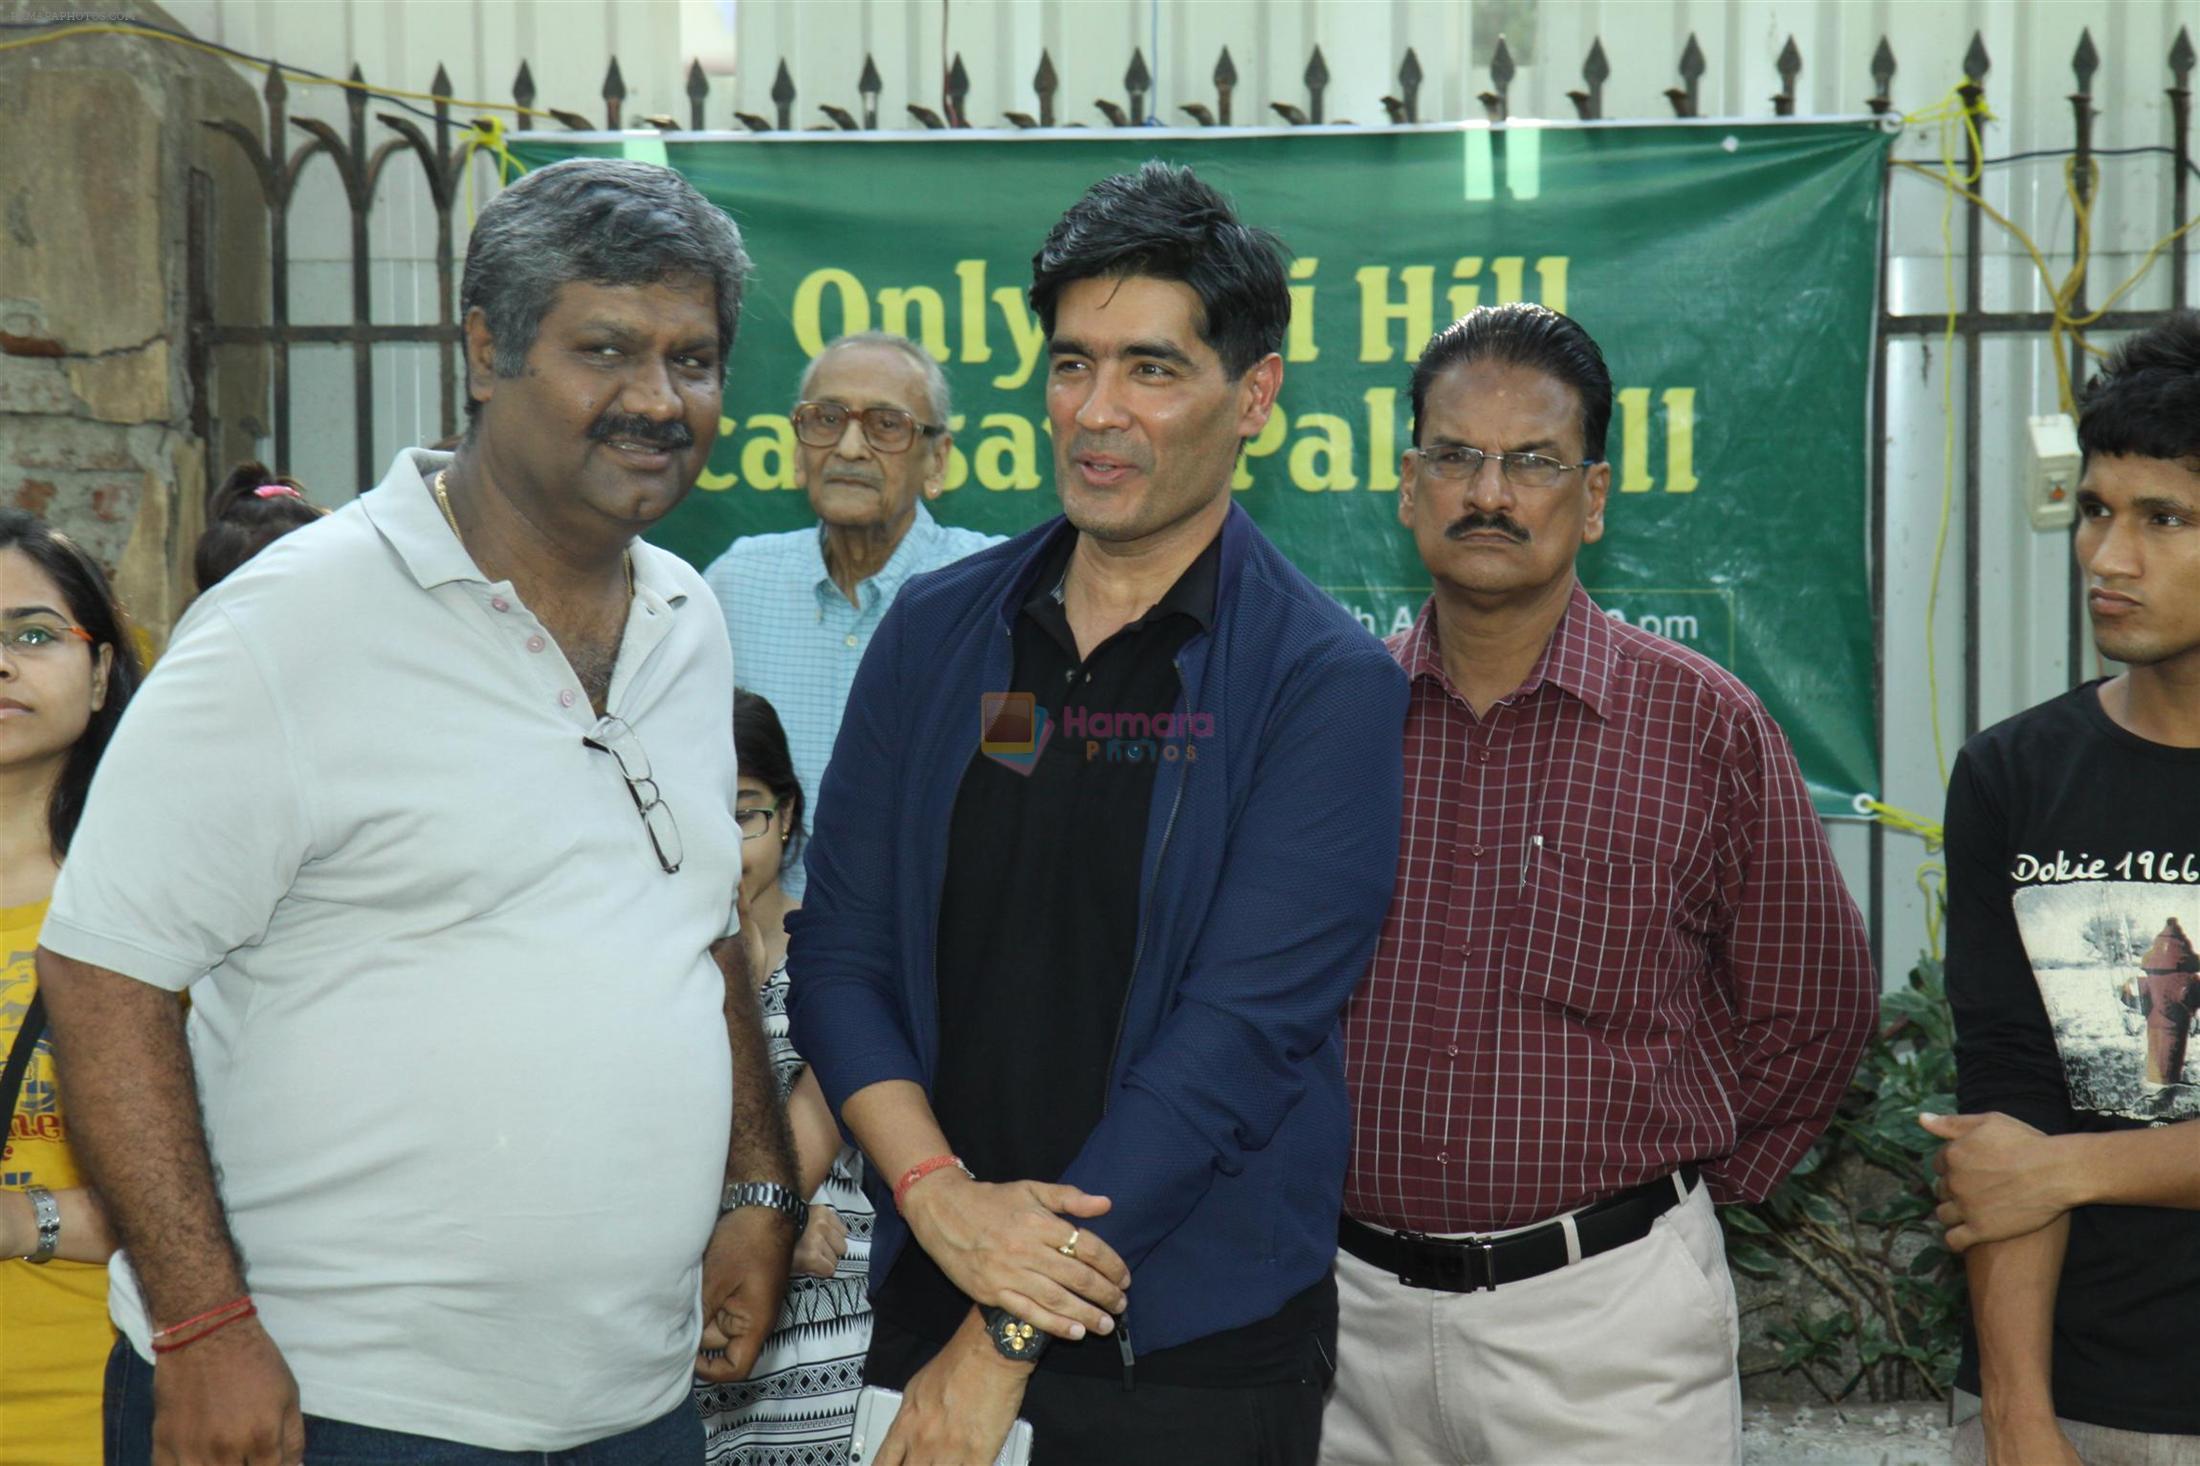 Manish malhotra protests against BMC for giving Hawkers Zone in Pali Hill on 13th April 2015